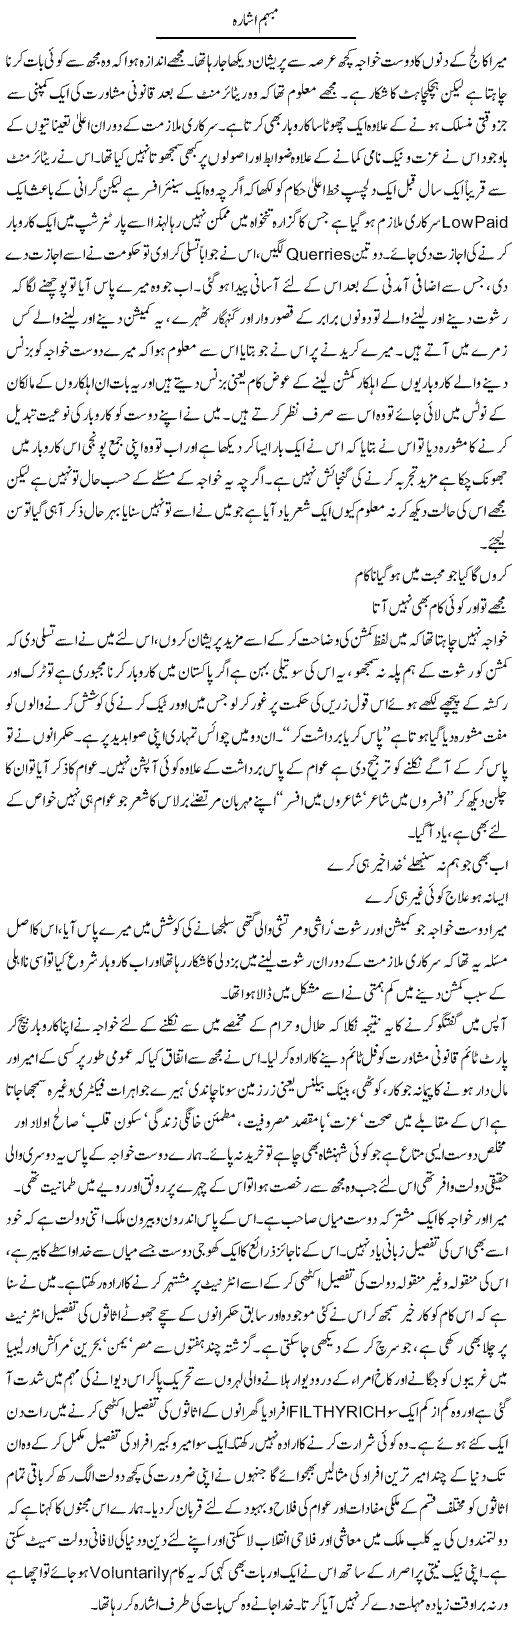 Jobs and Retirement Express Column Hameed Ahmed 23 February 2011